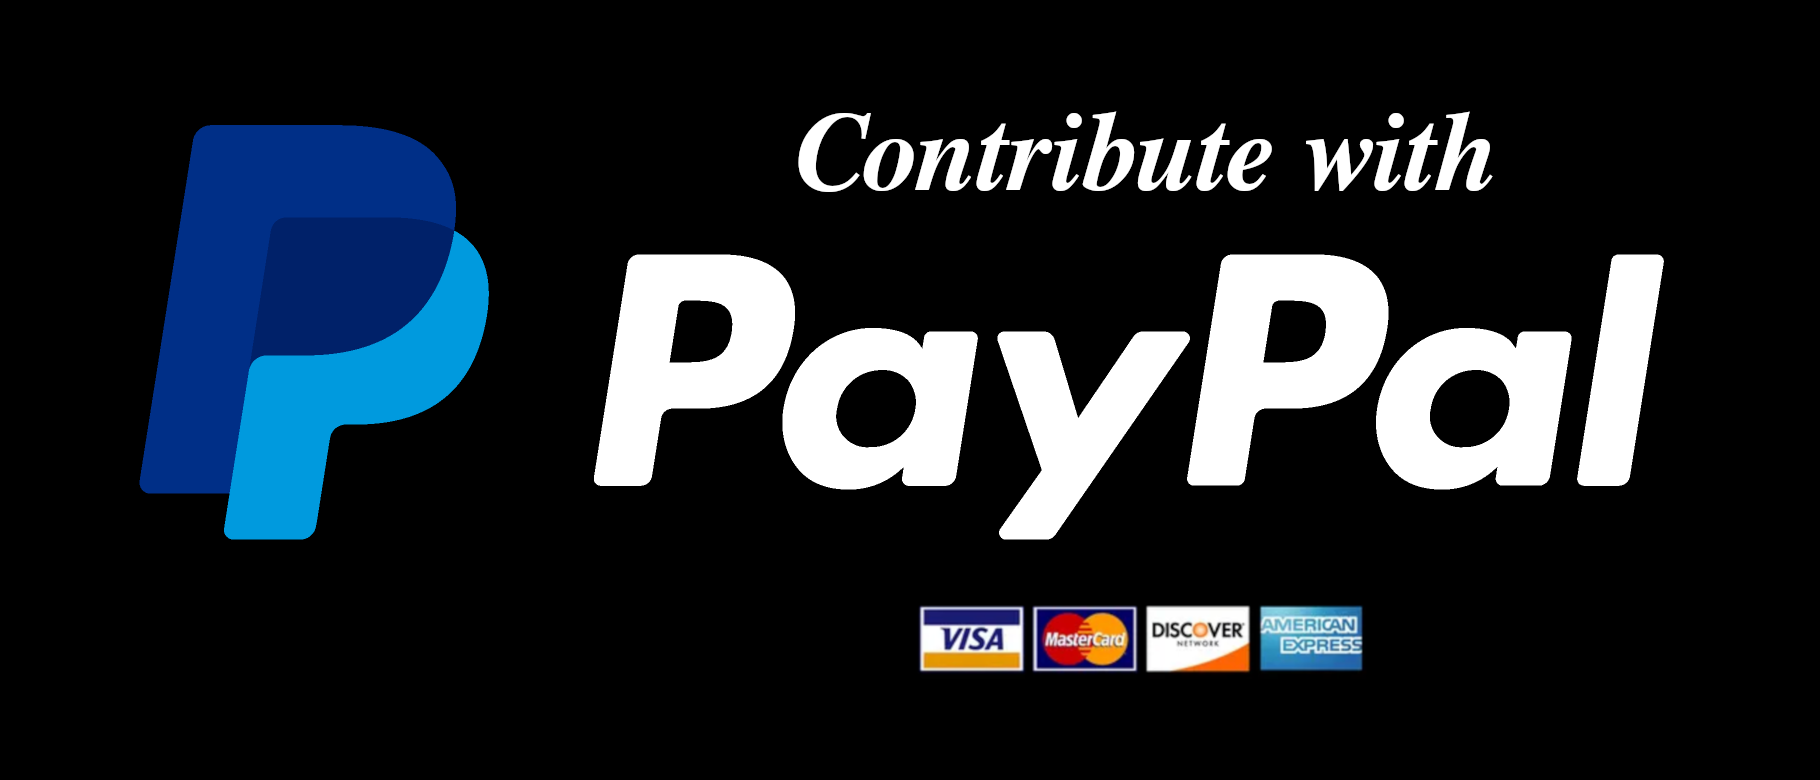 Contribute with PayPal